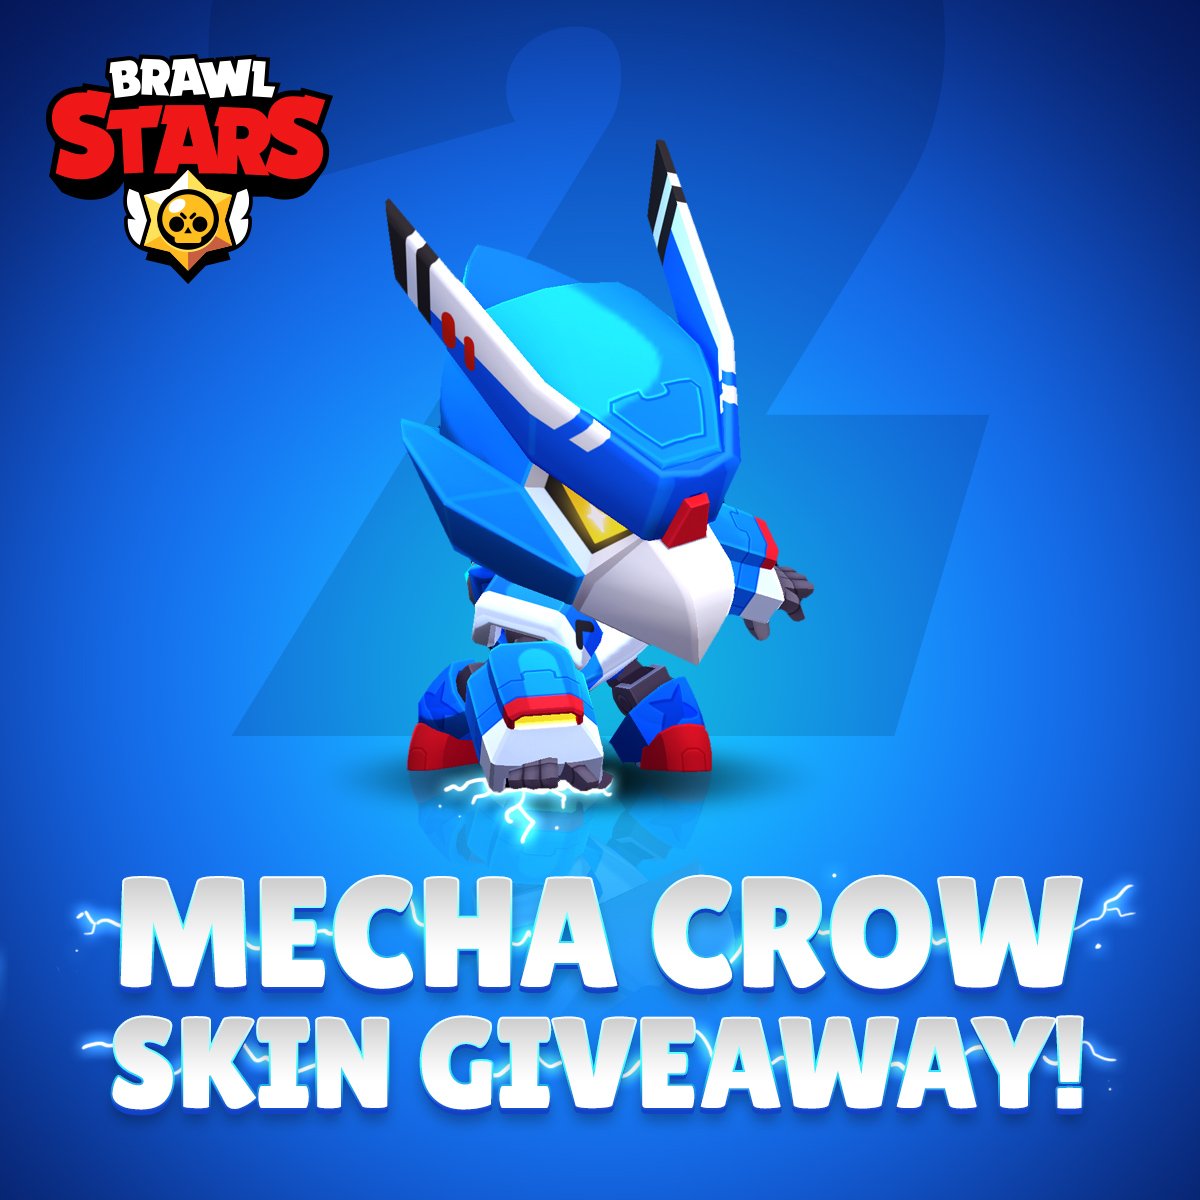 Brawl Stars On Twitter Let S Get To 2 Million Subs Subscribe To Https T Co Vk3uuiccrf And Comment Here Https T Co Gzup4er3yz For A Chance To Win Crow And His Brand New Mecha Skin Https T Co M1jepyl27p - crow brawl stars 2 3